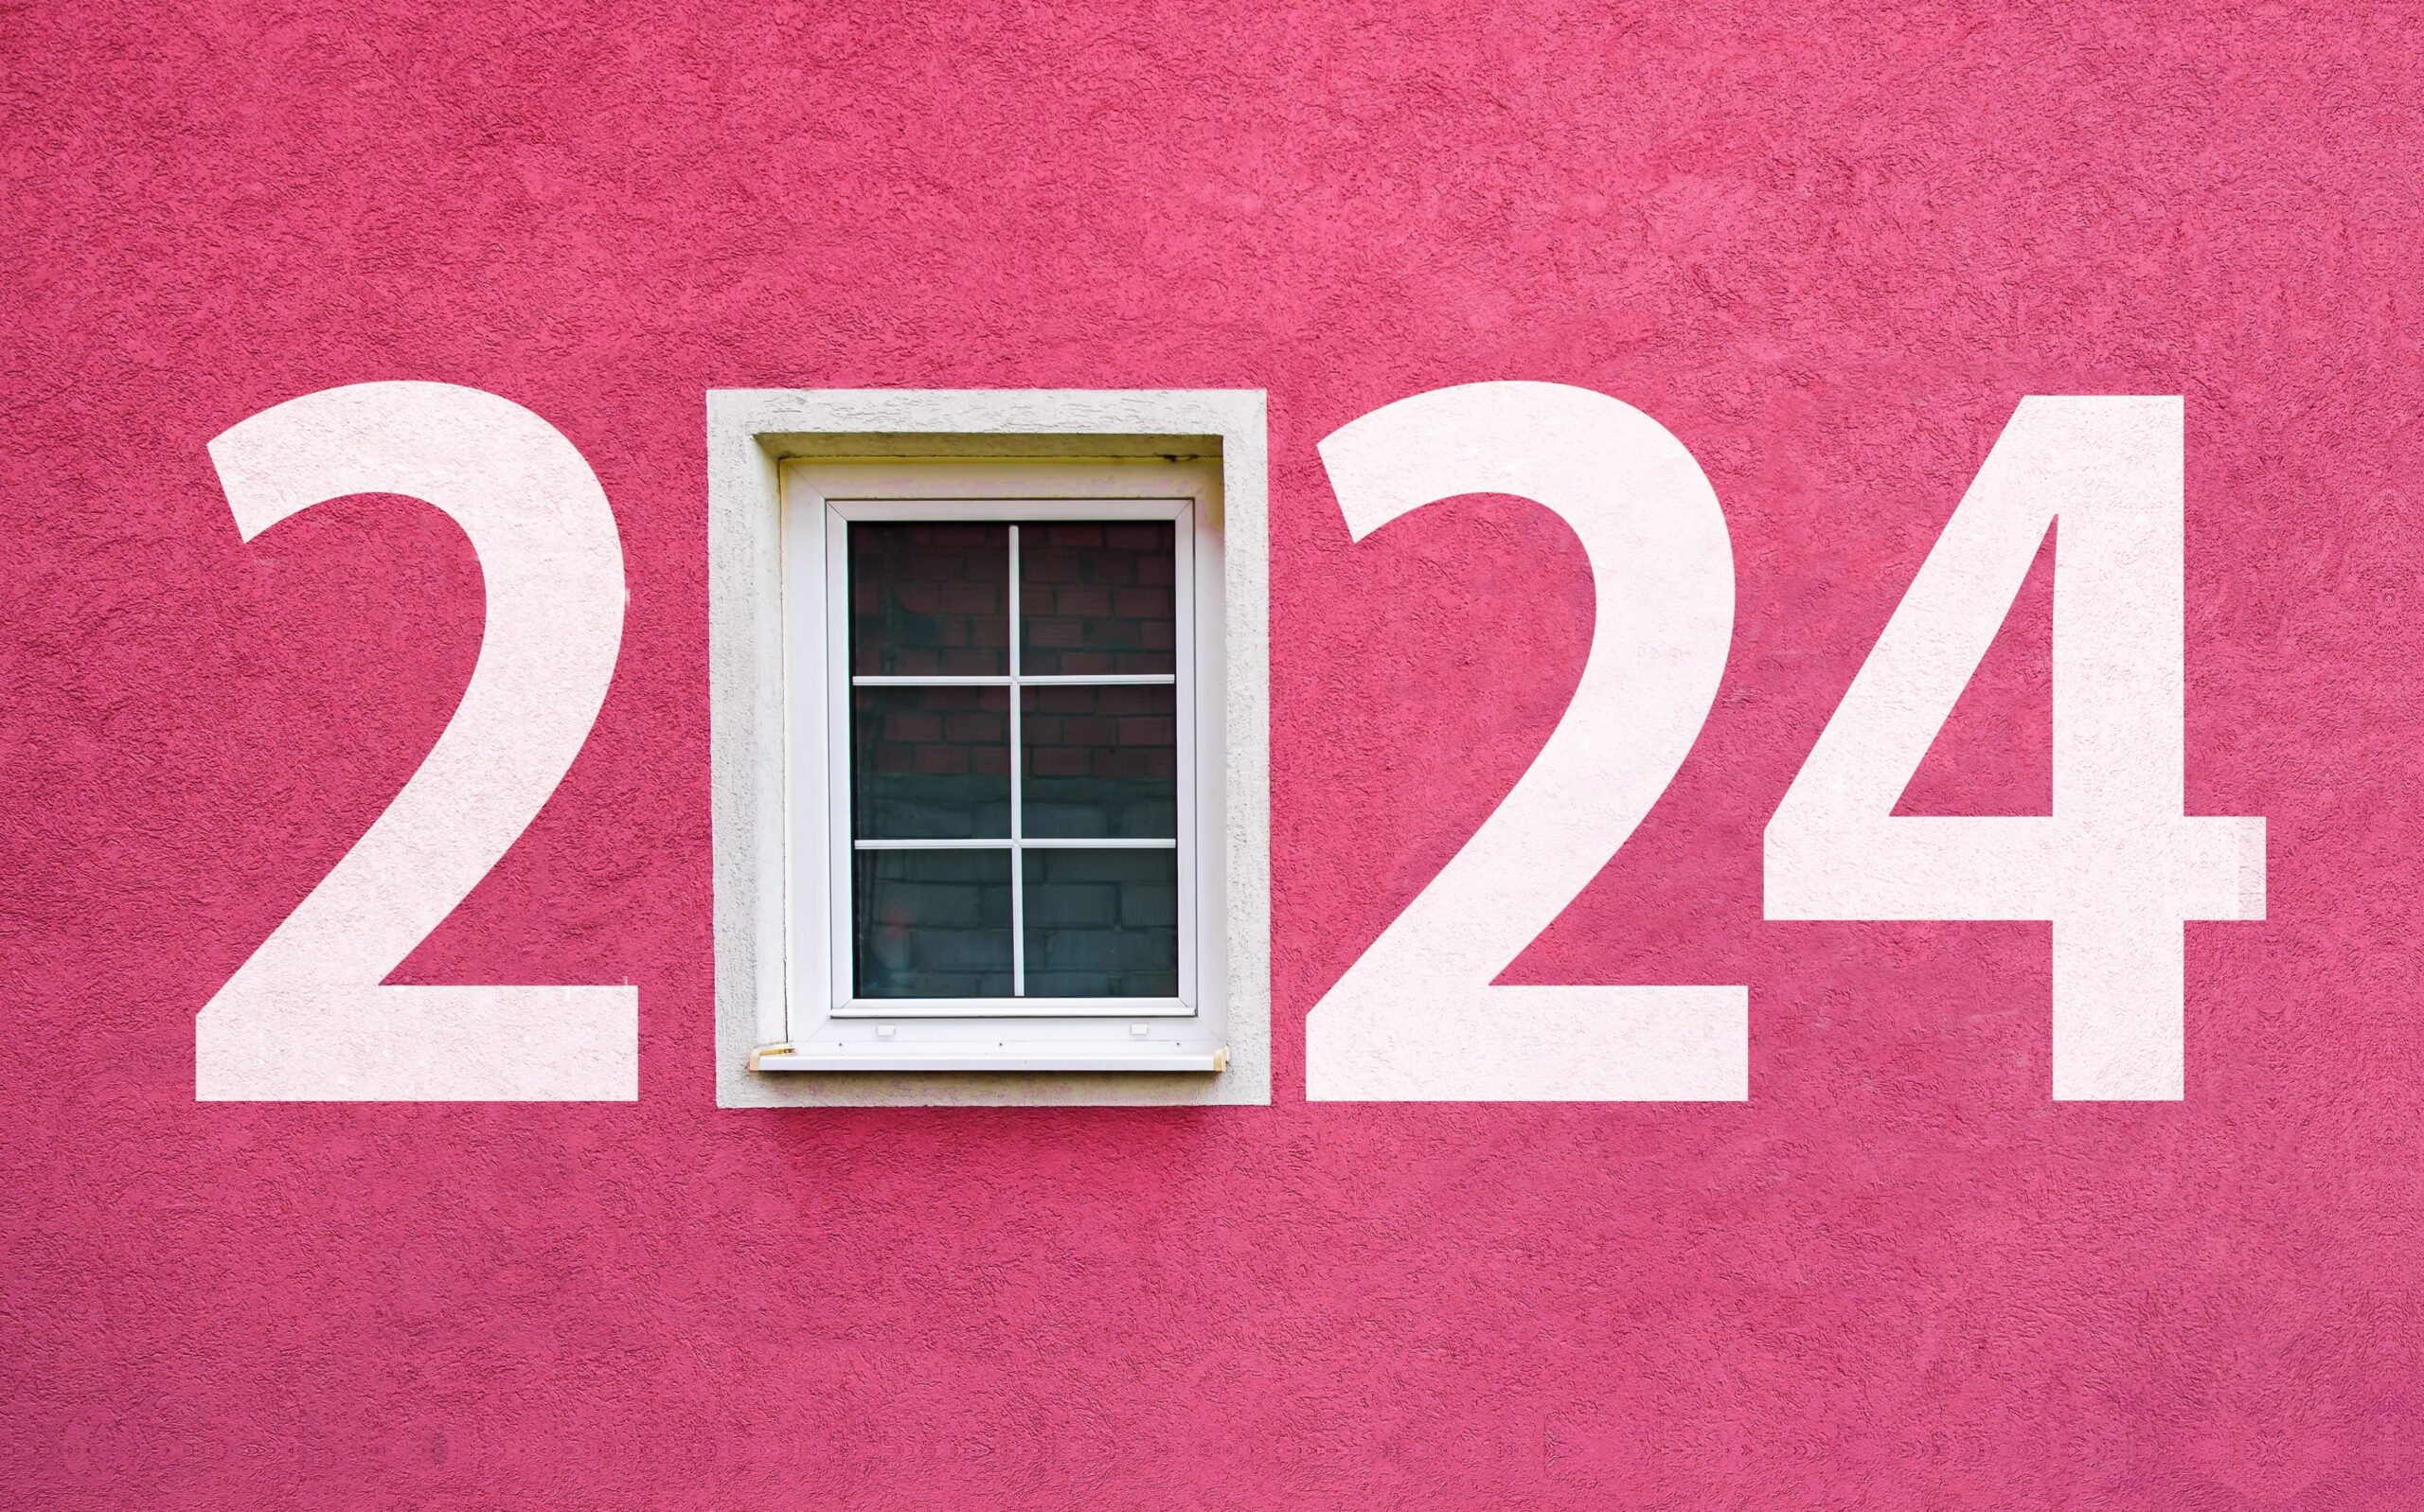 Happy,New,Year,2024.,Year,2024,On,Wall,With,Window